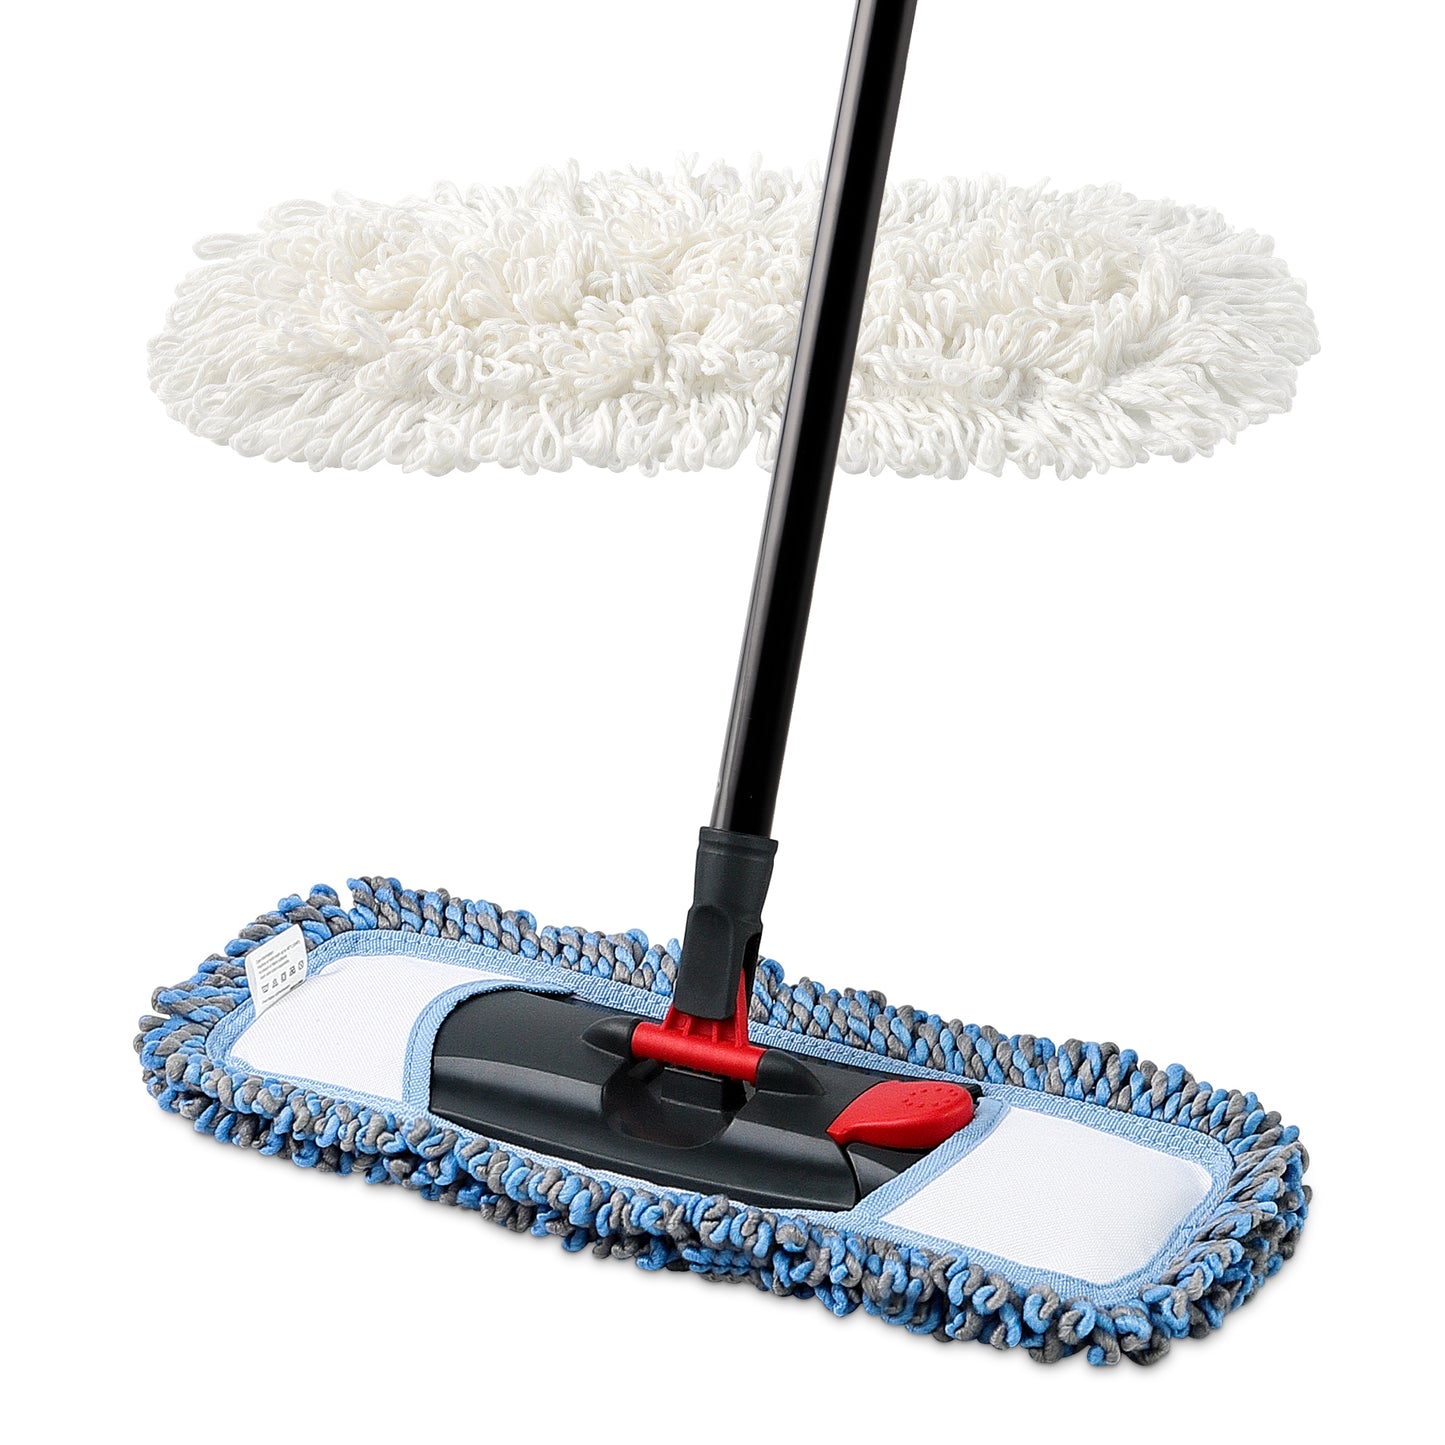 Microfiber Mop Floor Cleaning System Washable Pads Reusable Dust